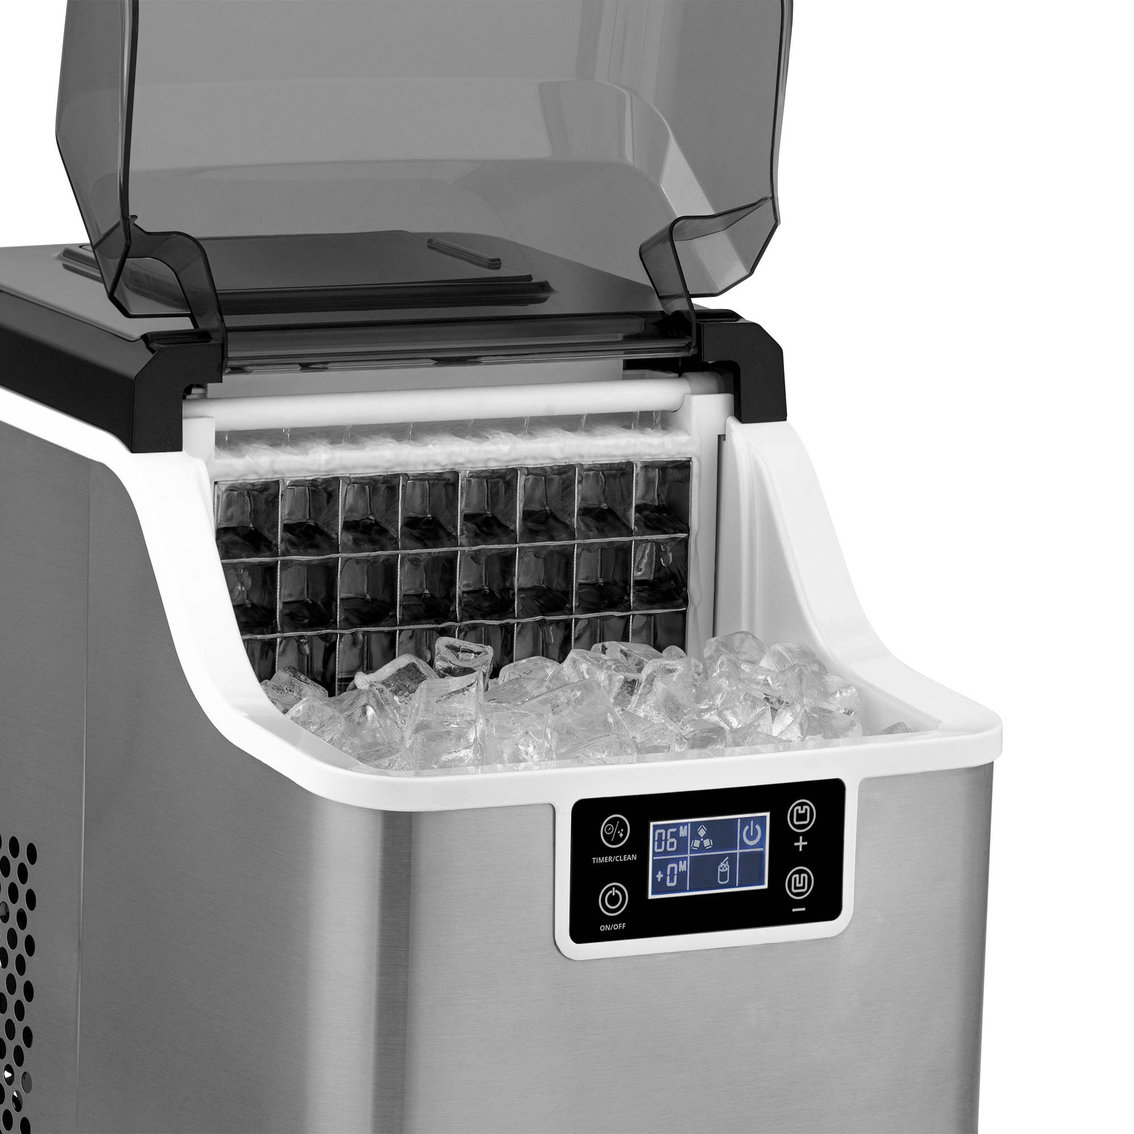 New Air LLC 45 lb. Clear Ice Maker - Image 2 of 10